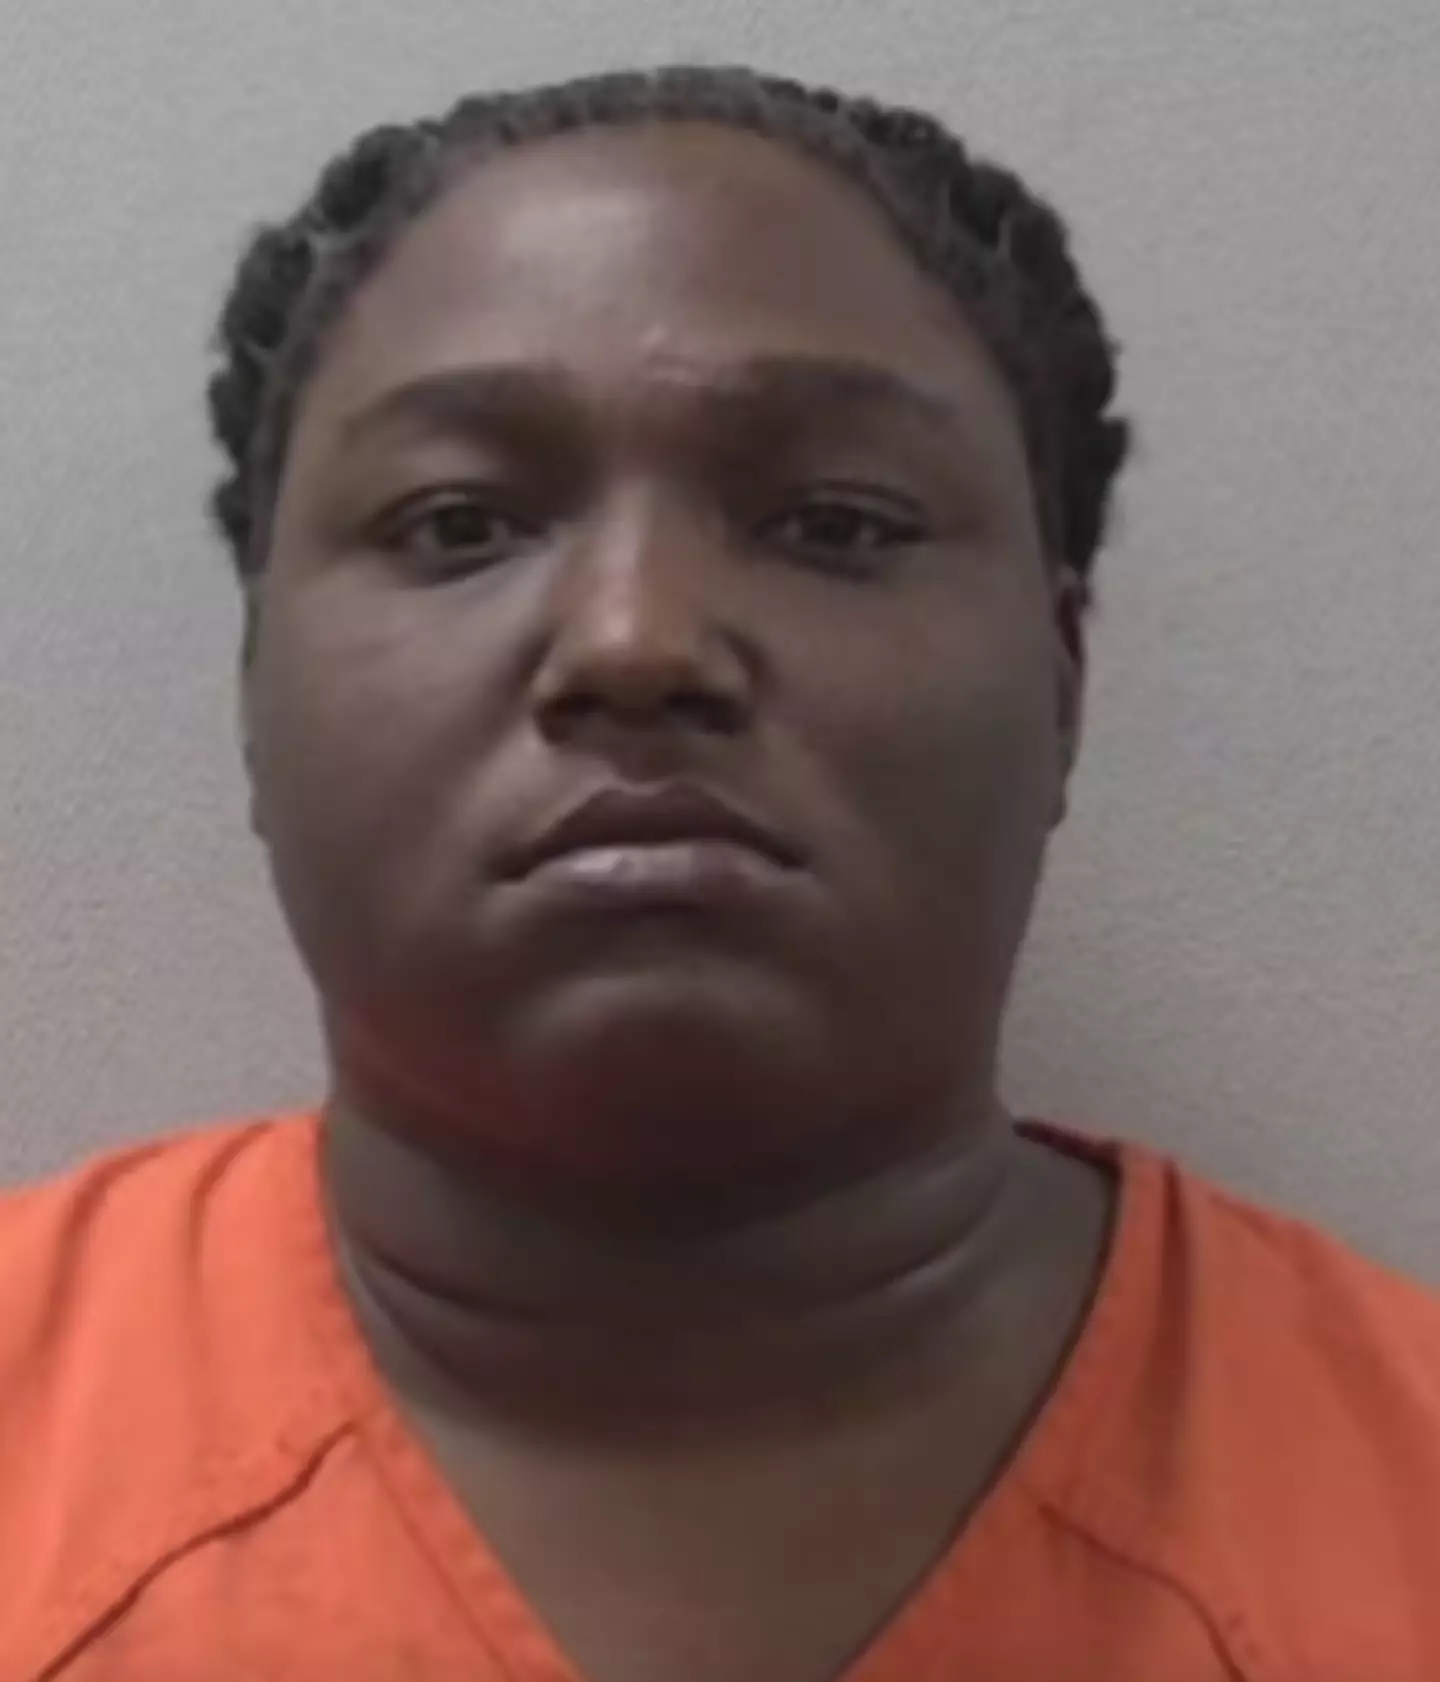 Jewayne Price was arrested in connection with the Carolina shooting.